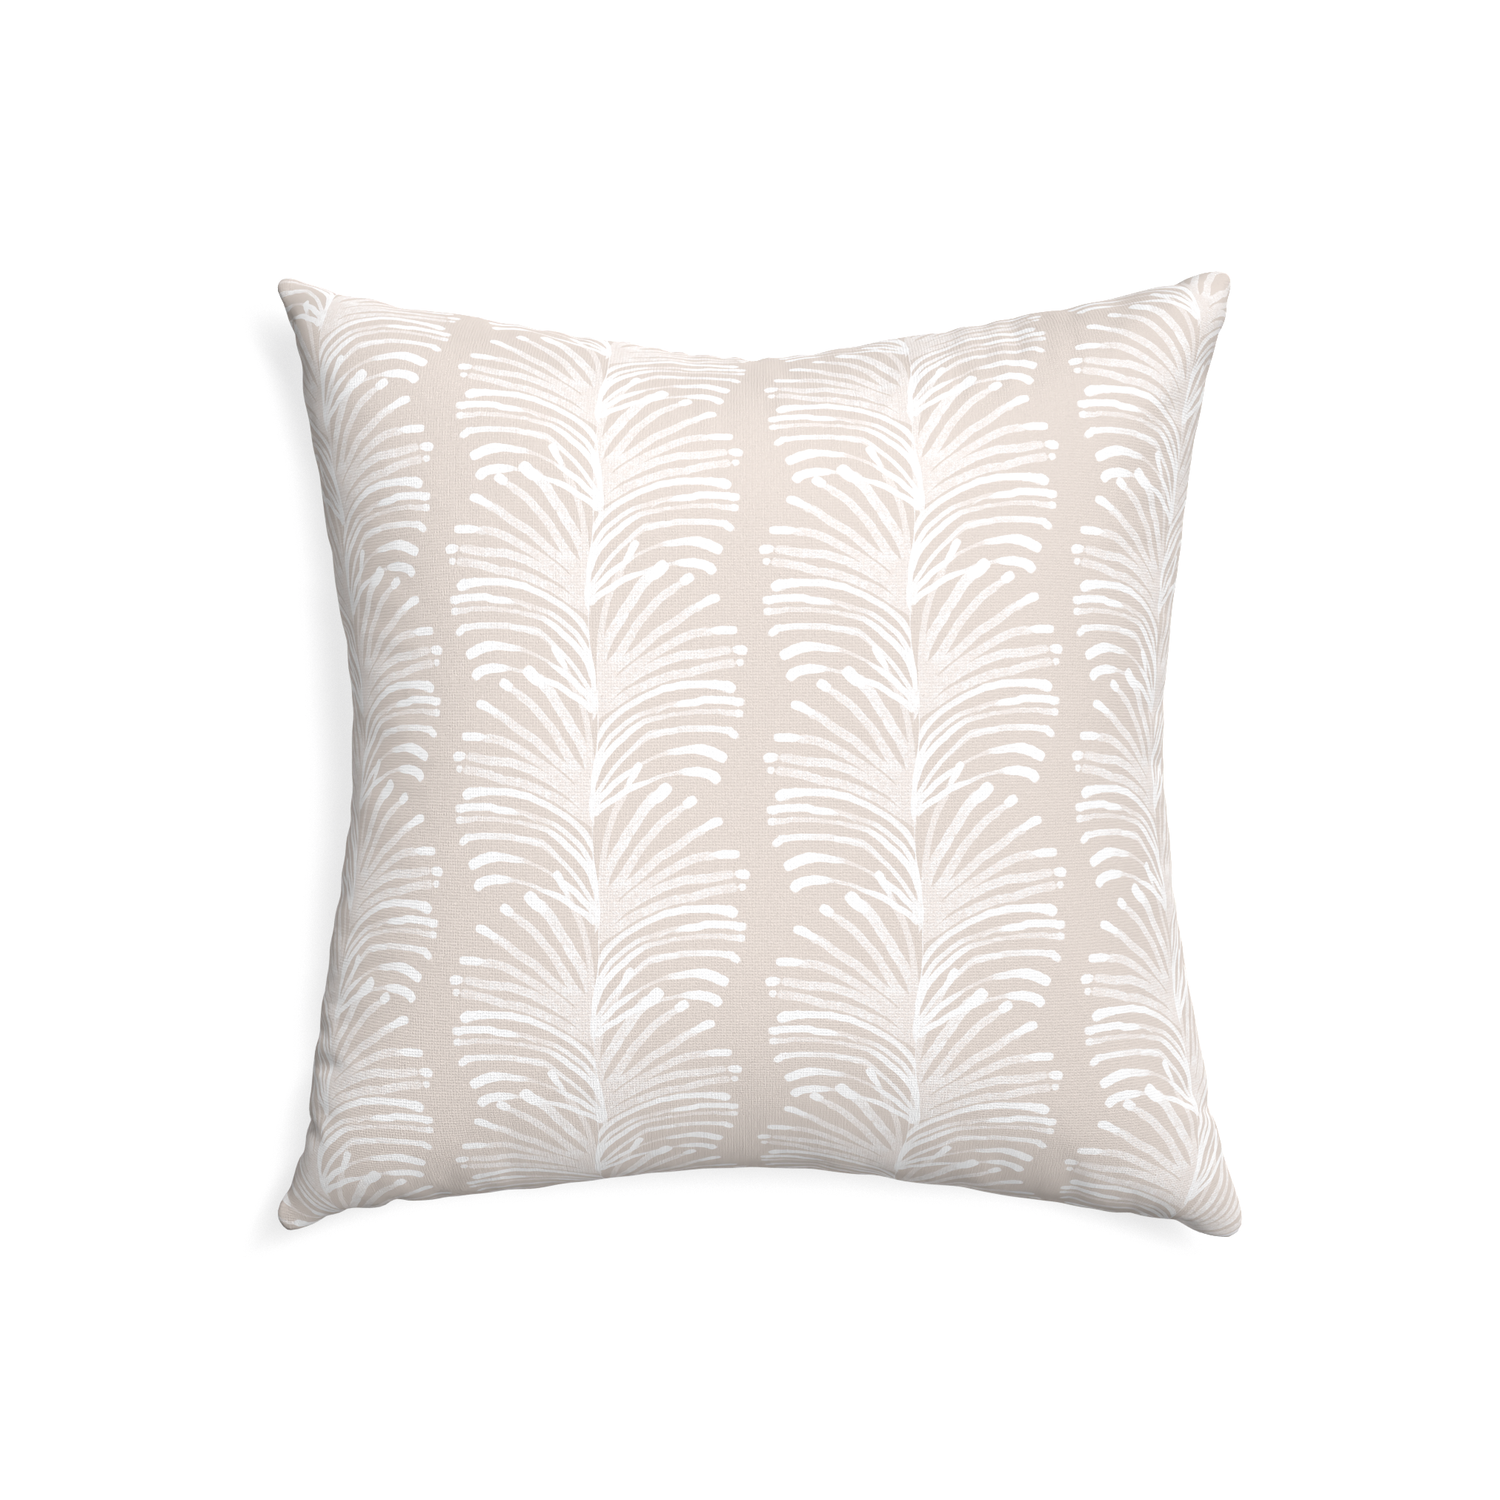 22-square emma sand custom pillow with none on white background